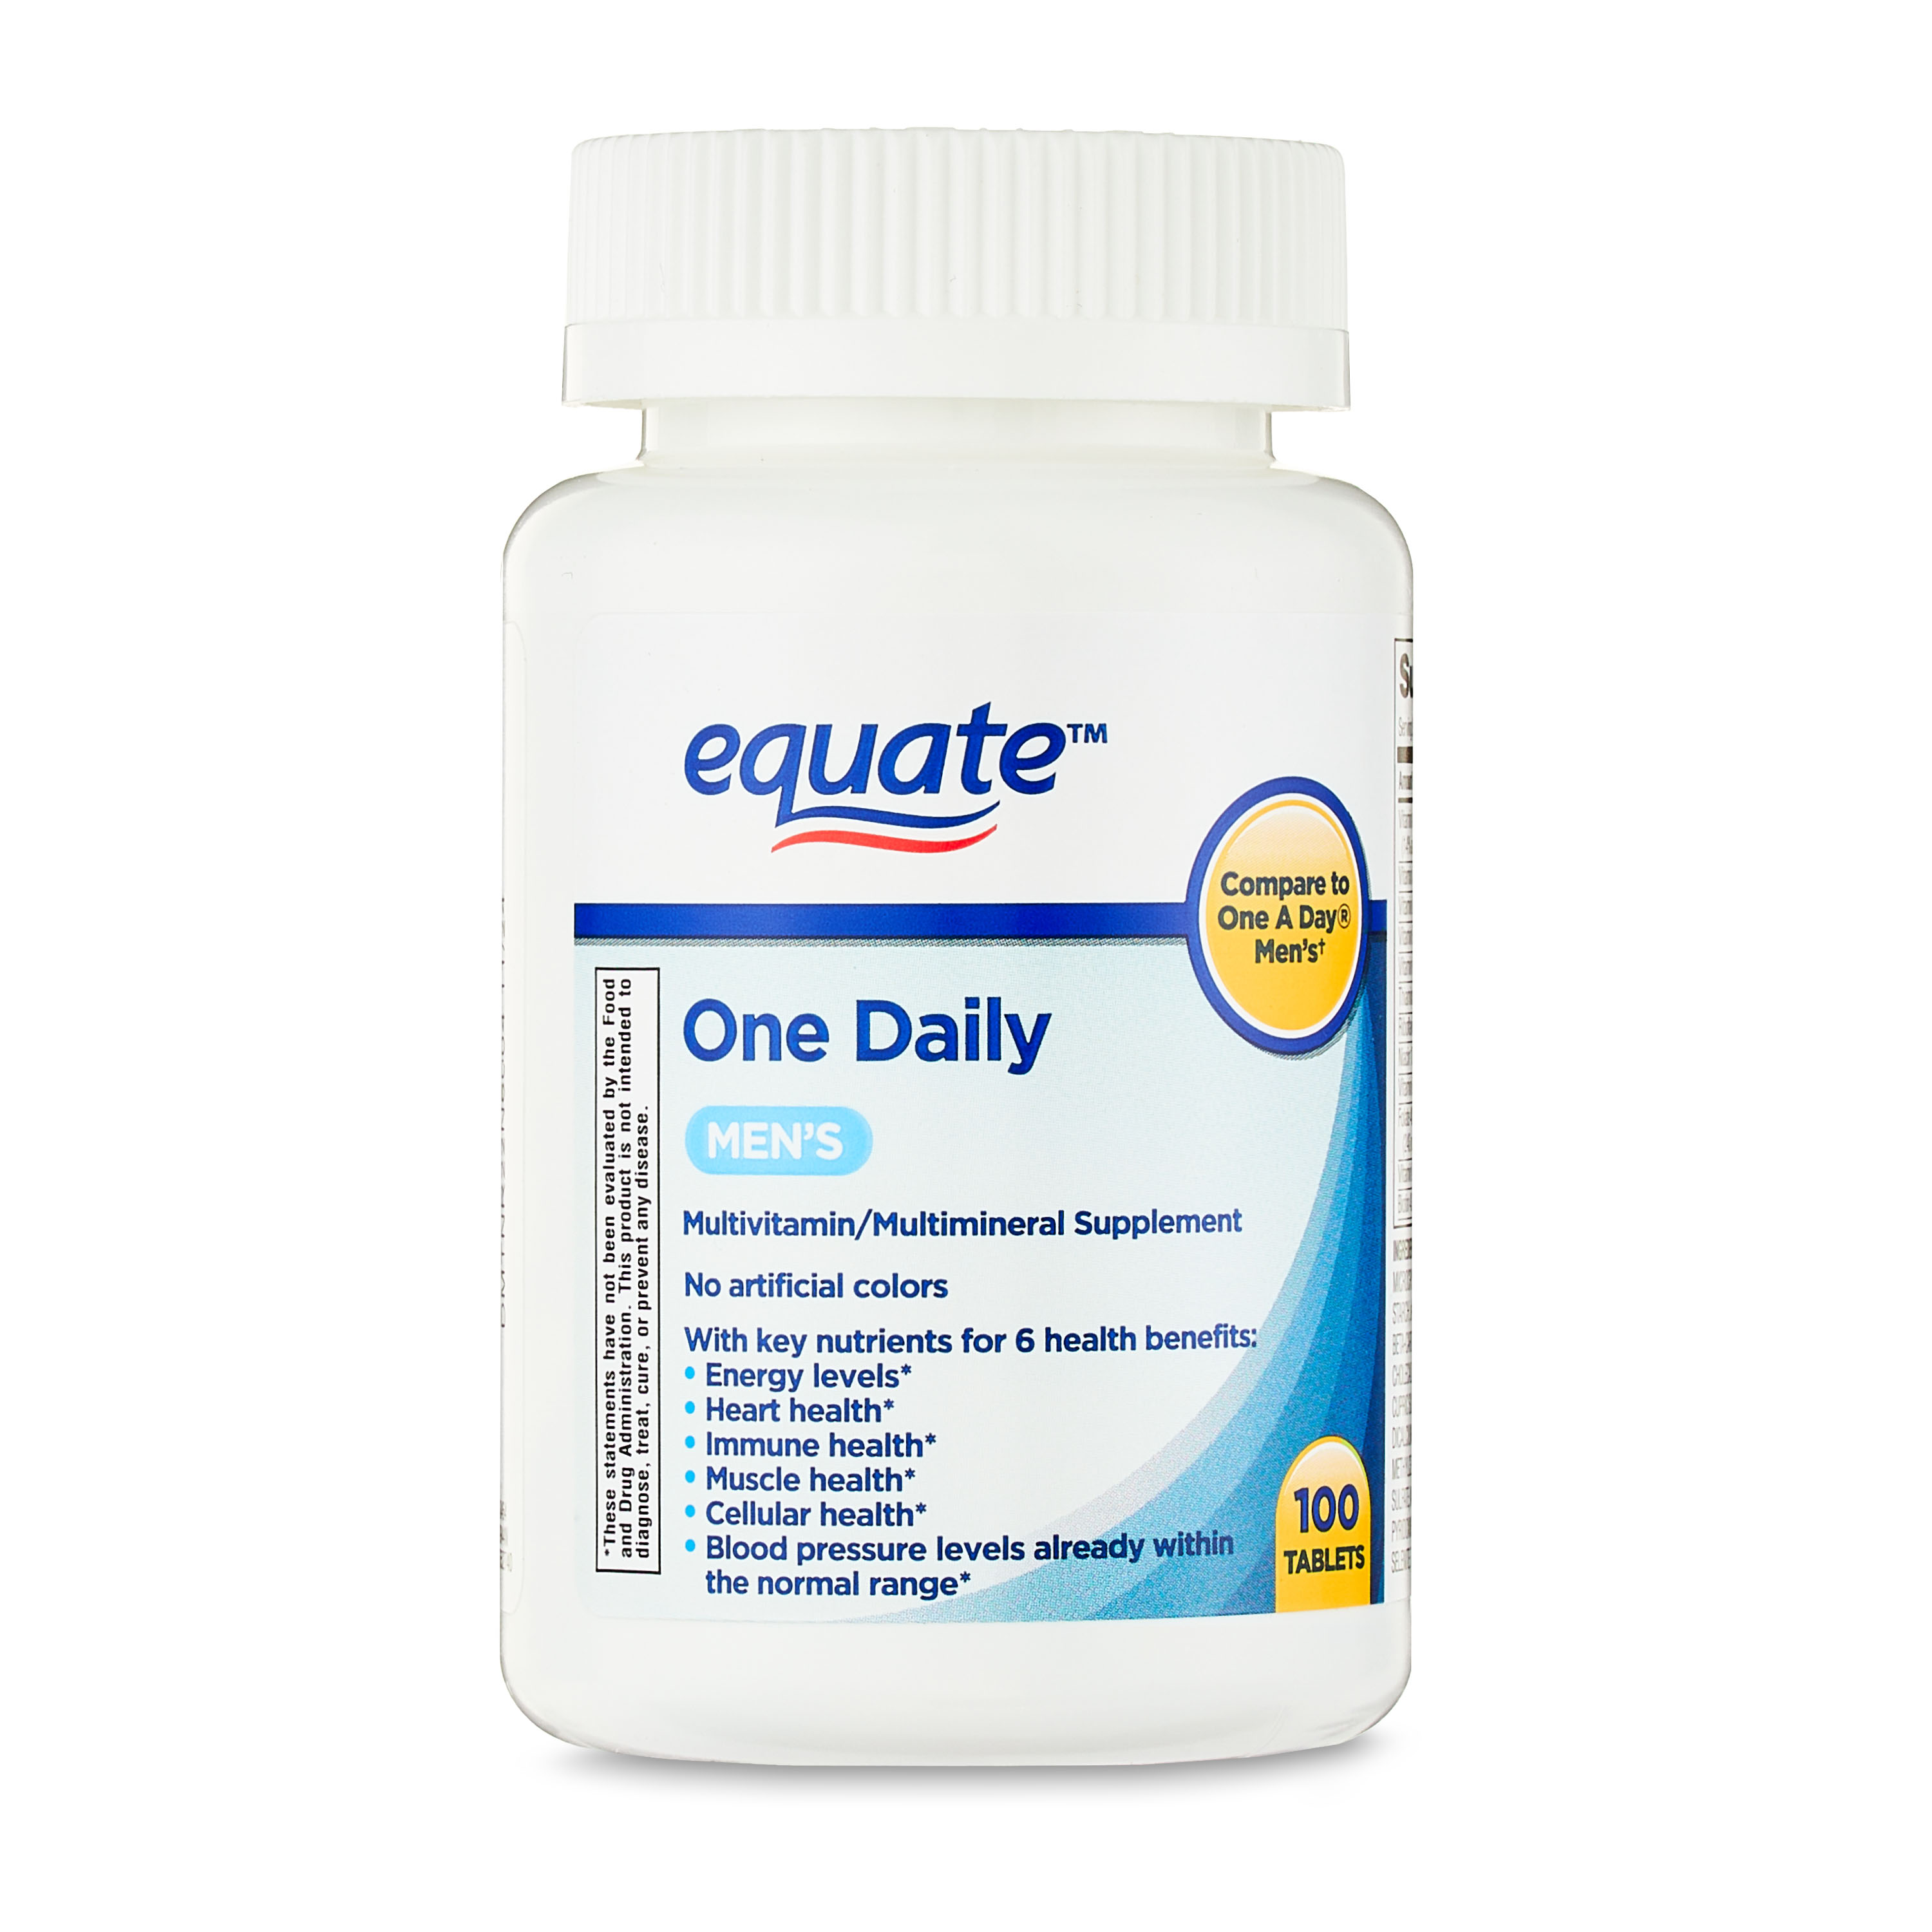 Equate One Daily Men's Multivitamin/Multimineral Supplement Tablets, 100 Count - image 1 of 10